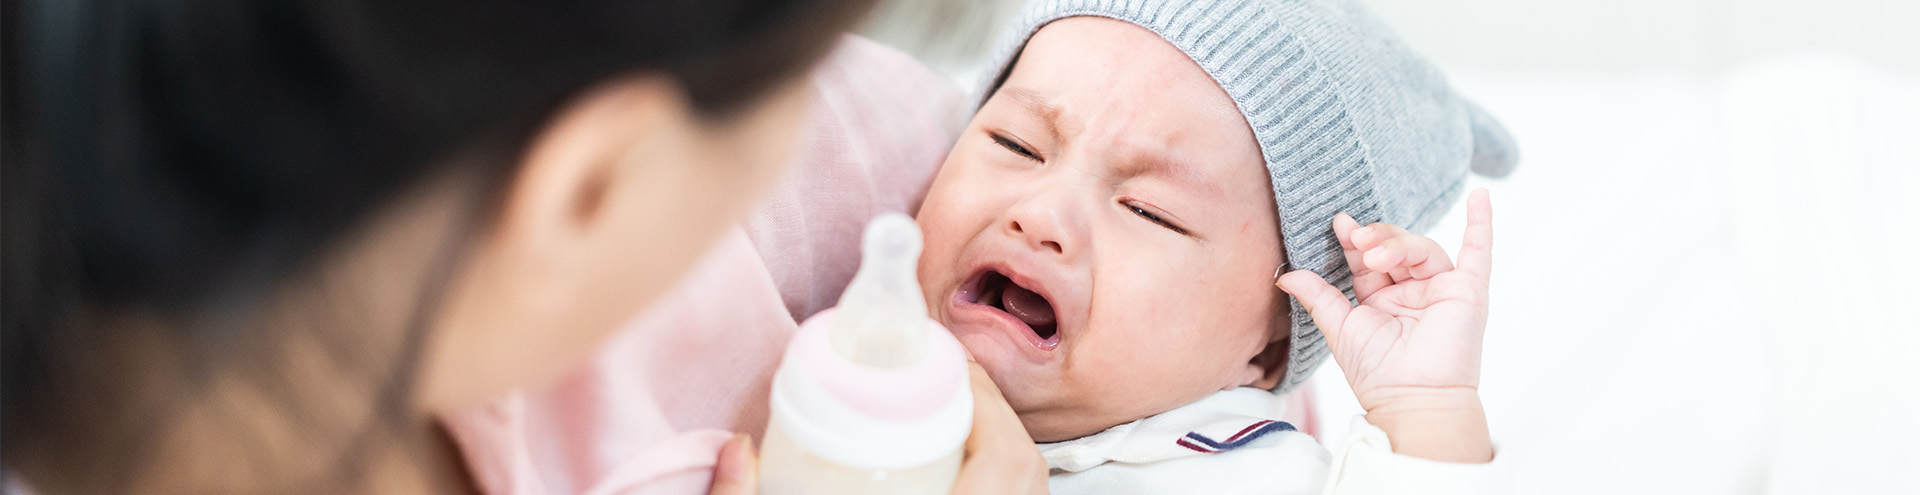 Feeding your baby with formula